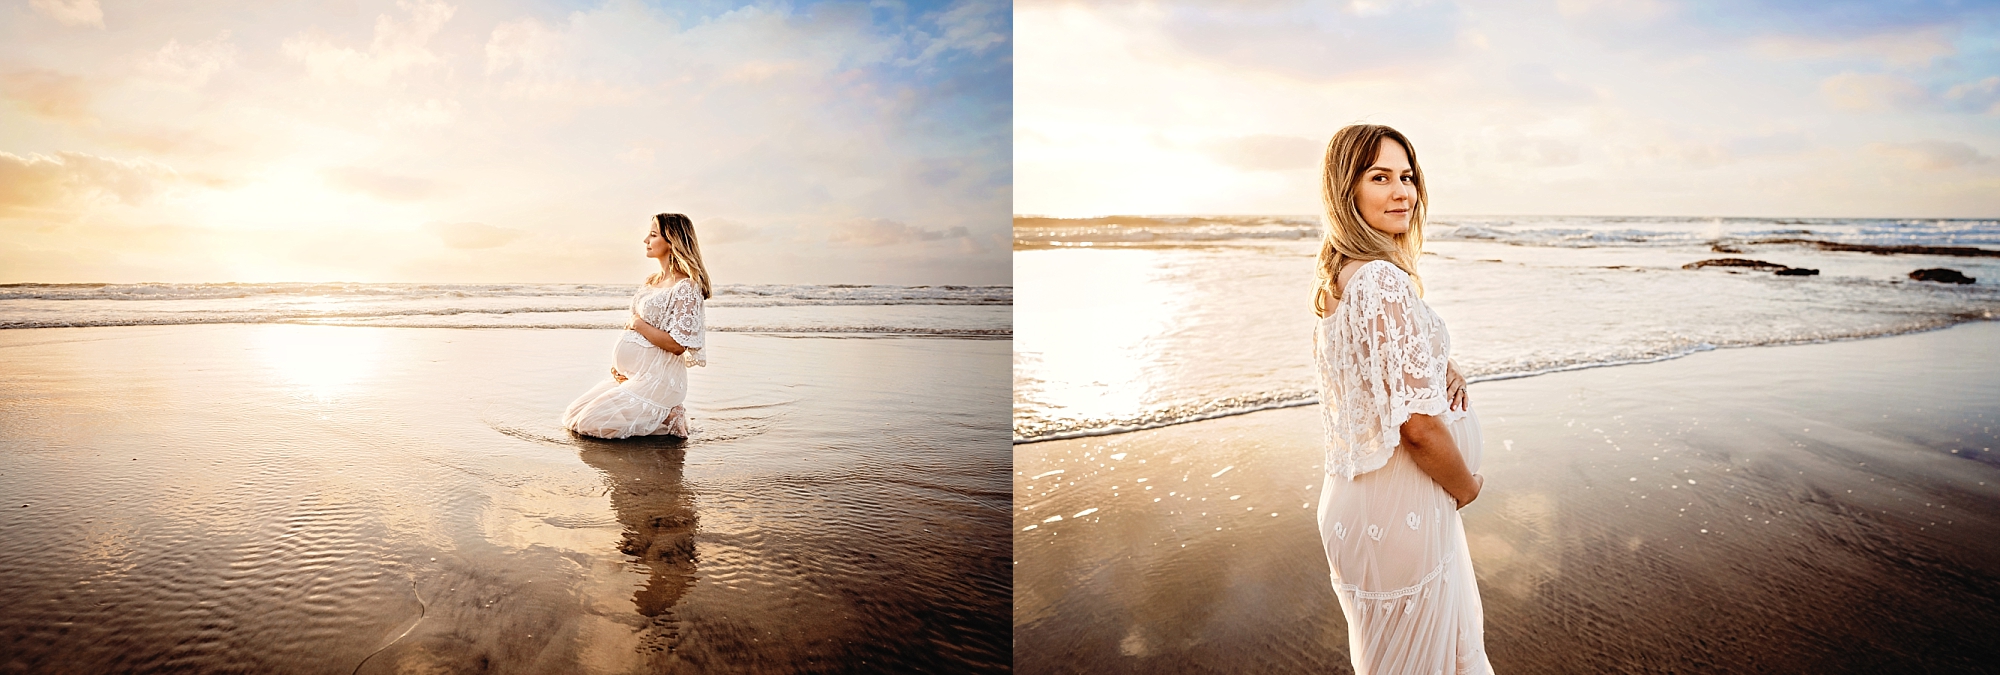 San Diego maternity photo shoot at the beach at sunset 